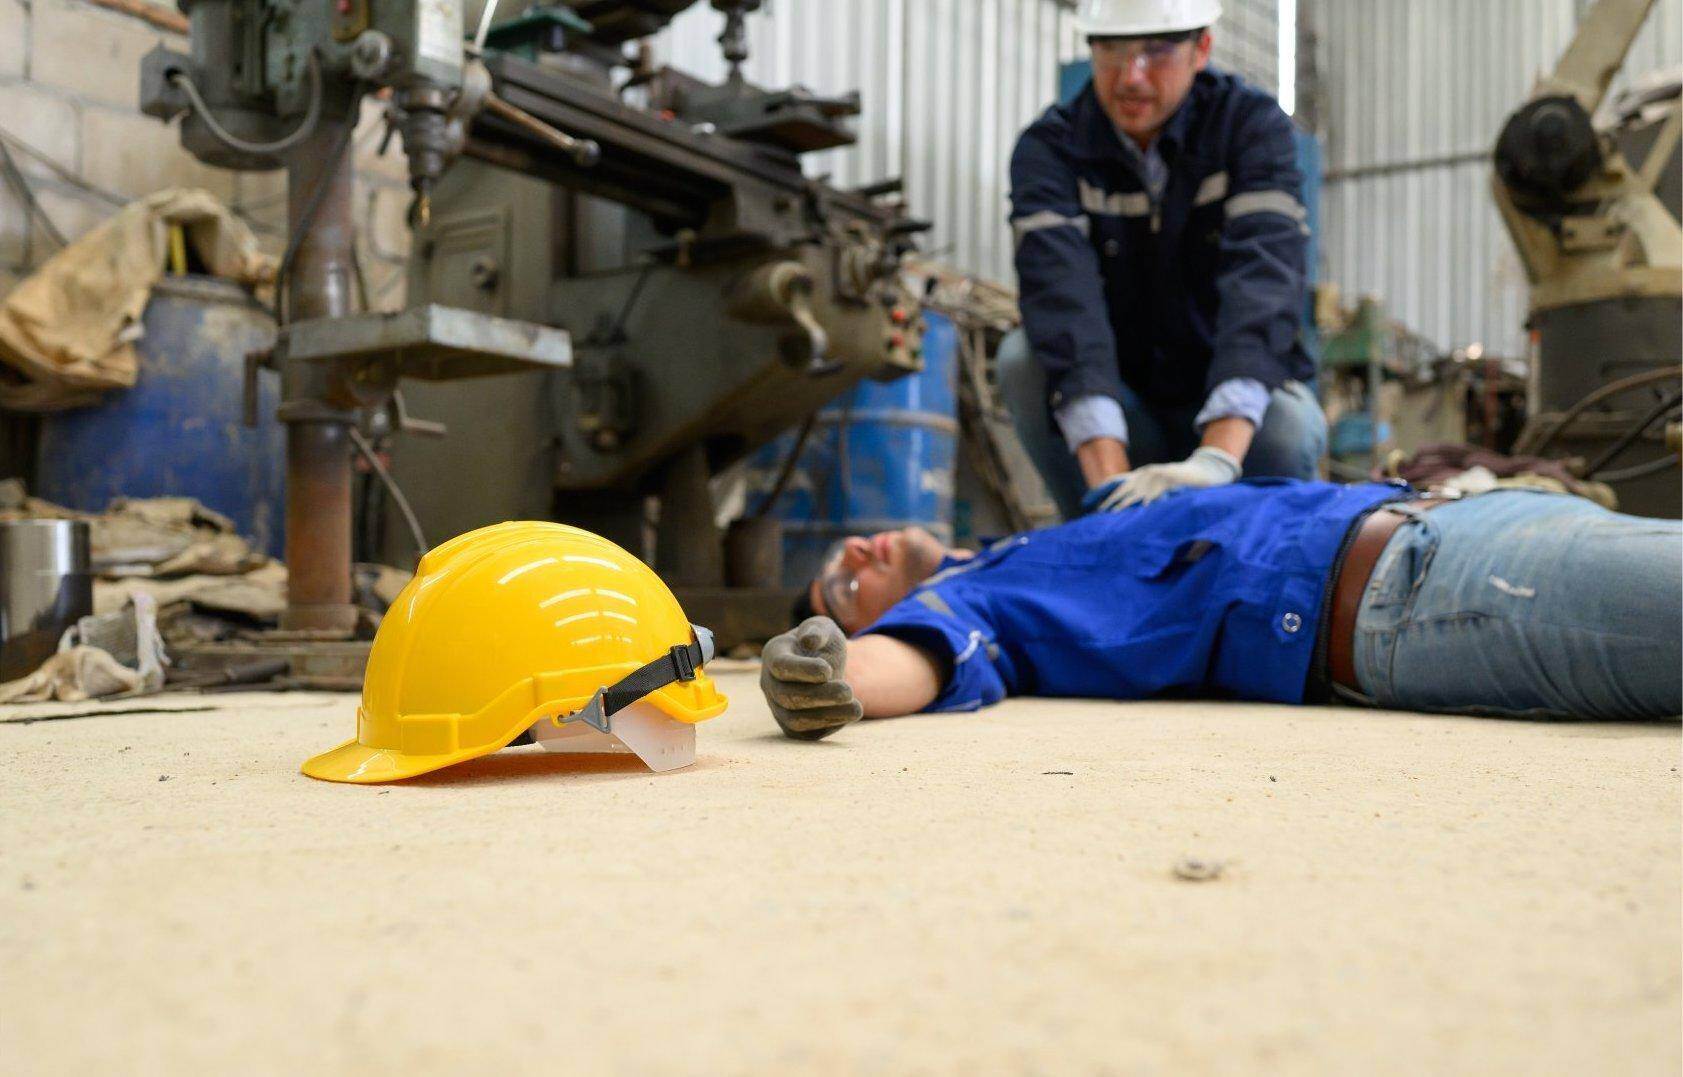 An unconscious man who has been injured on the job who will file for workers compensation in LaGrange, Georgia